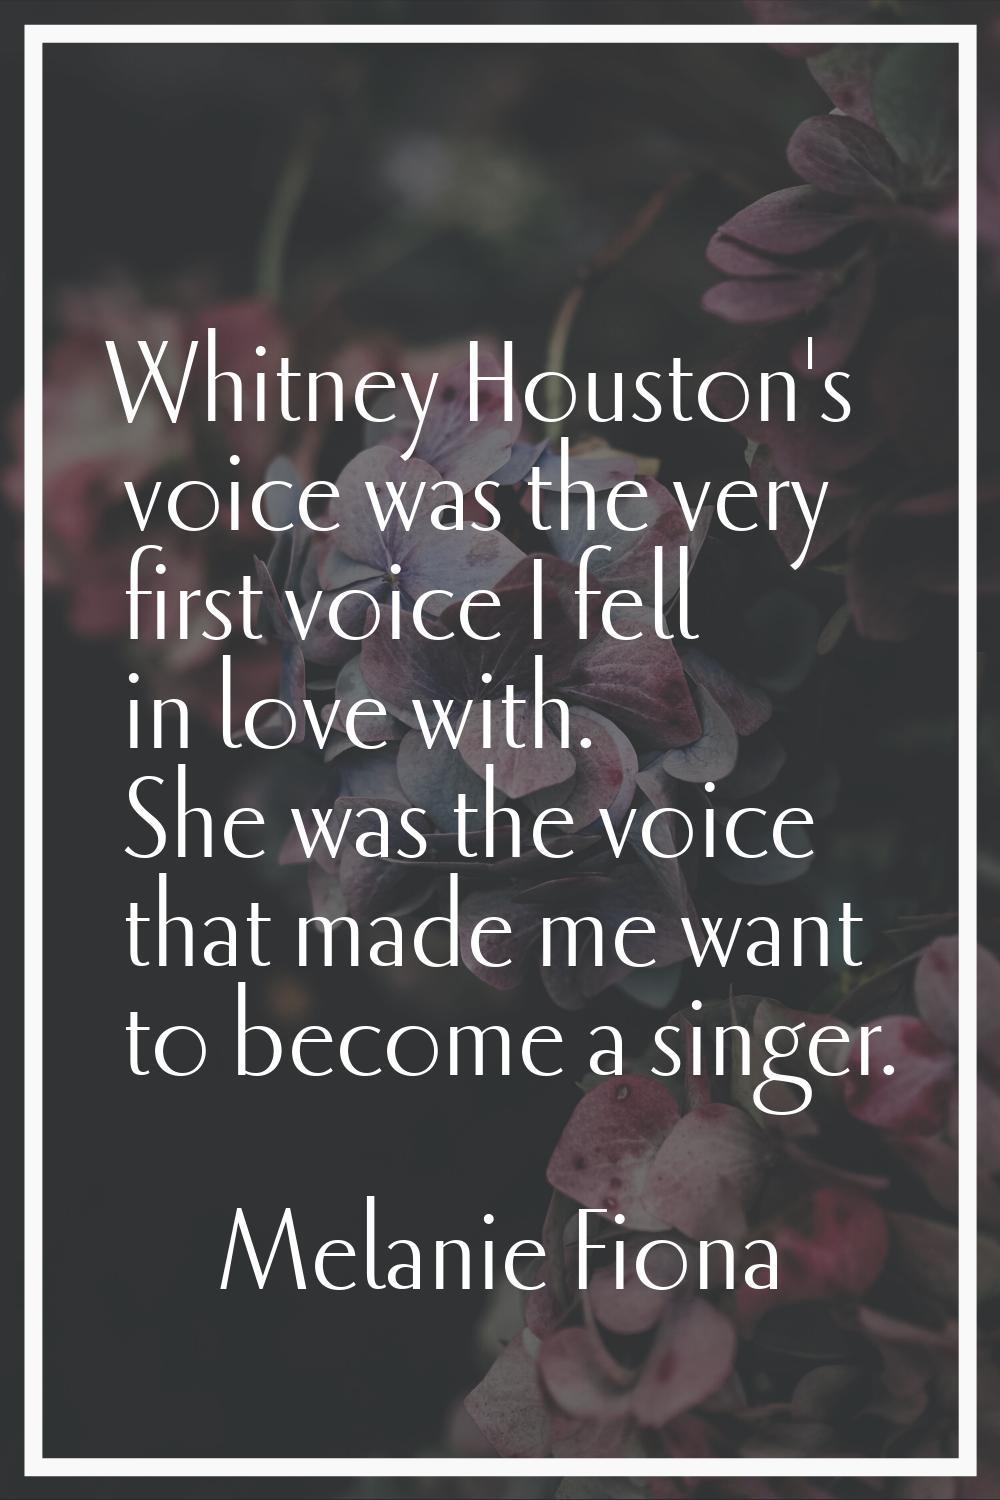 Whitney Houston's voice was the very first voice I fell in love with. She was the voice that made m